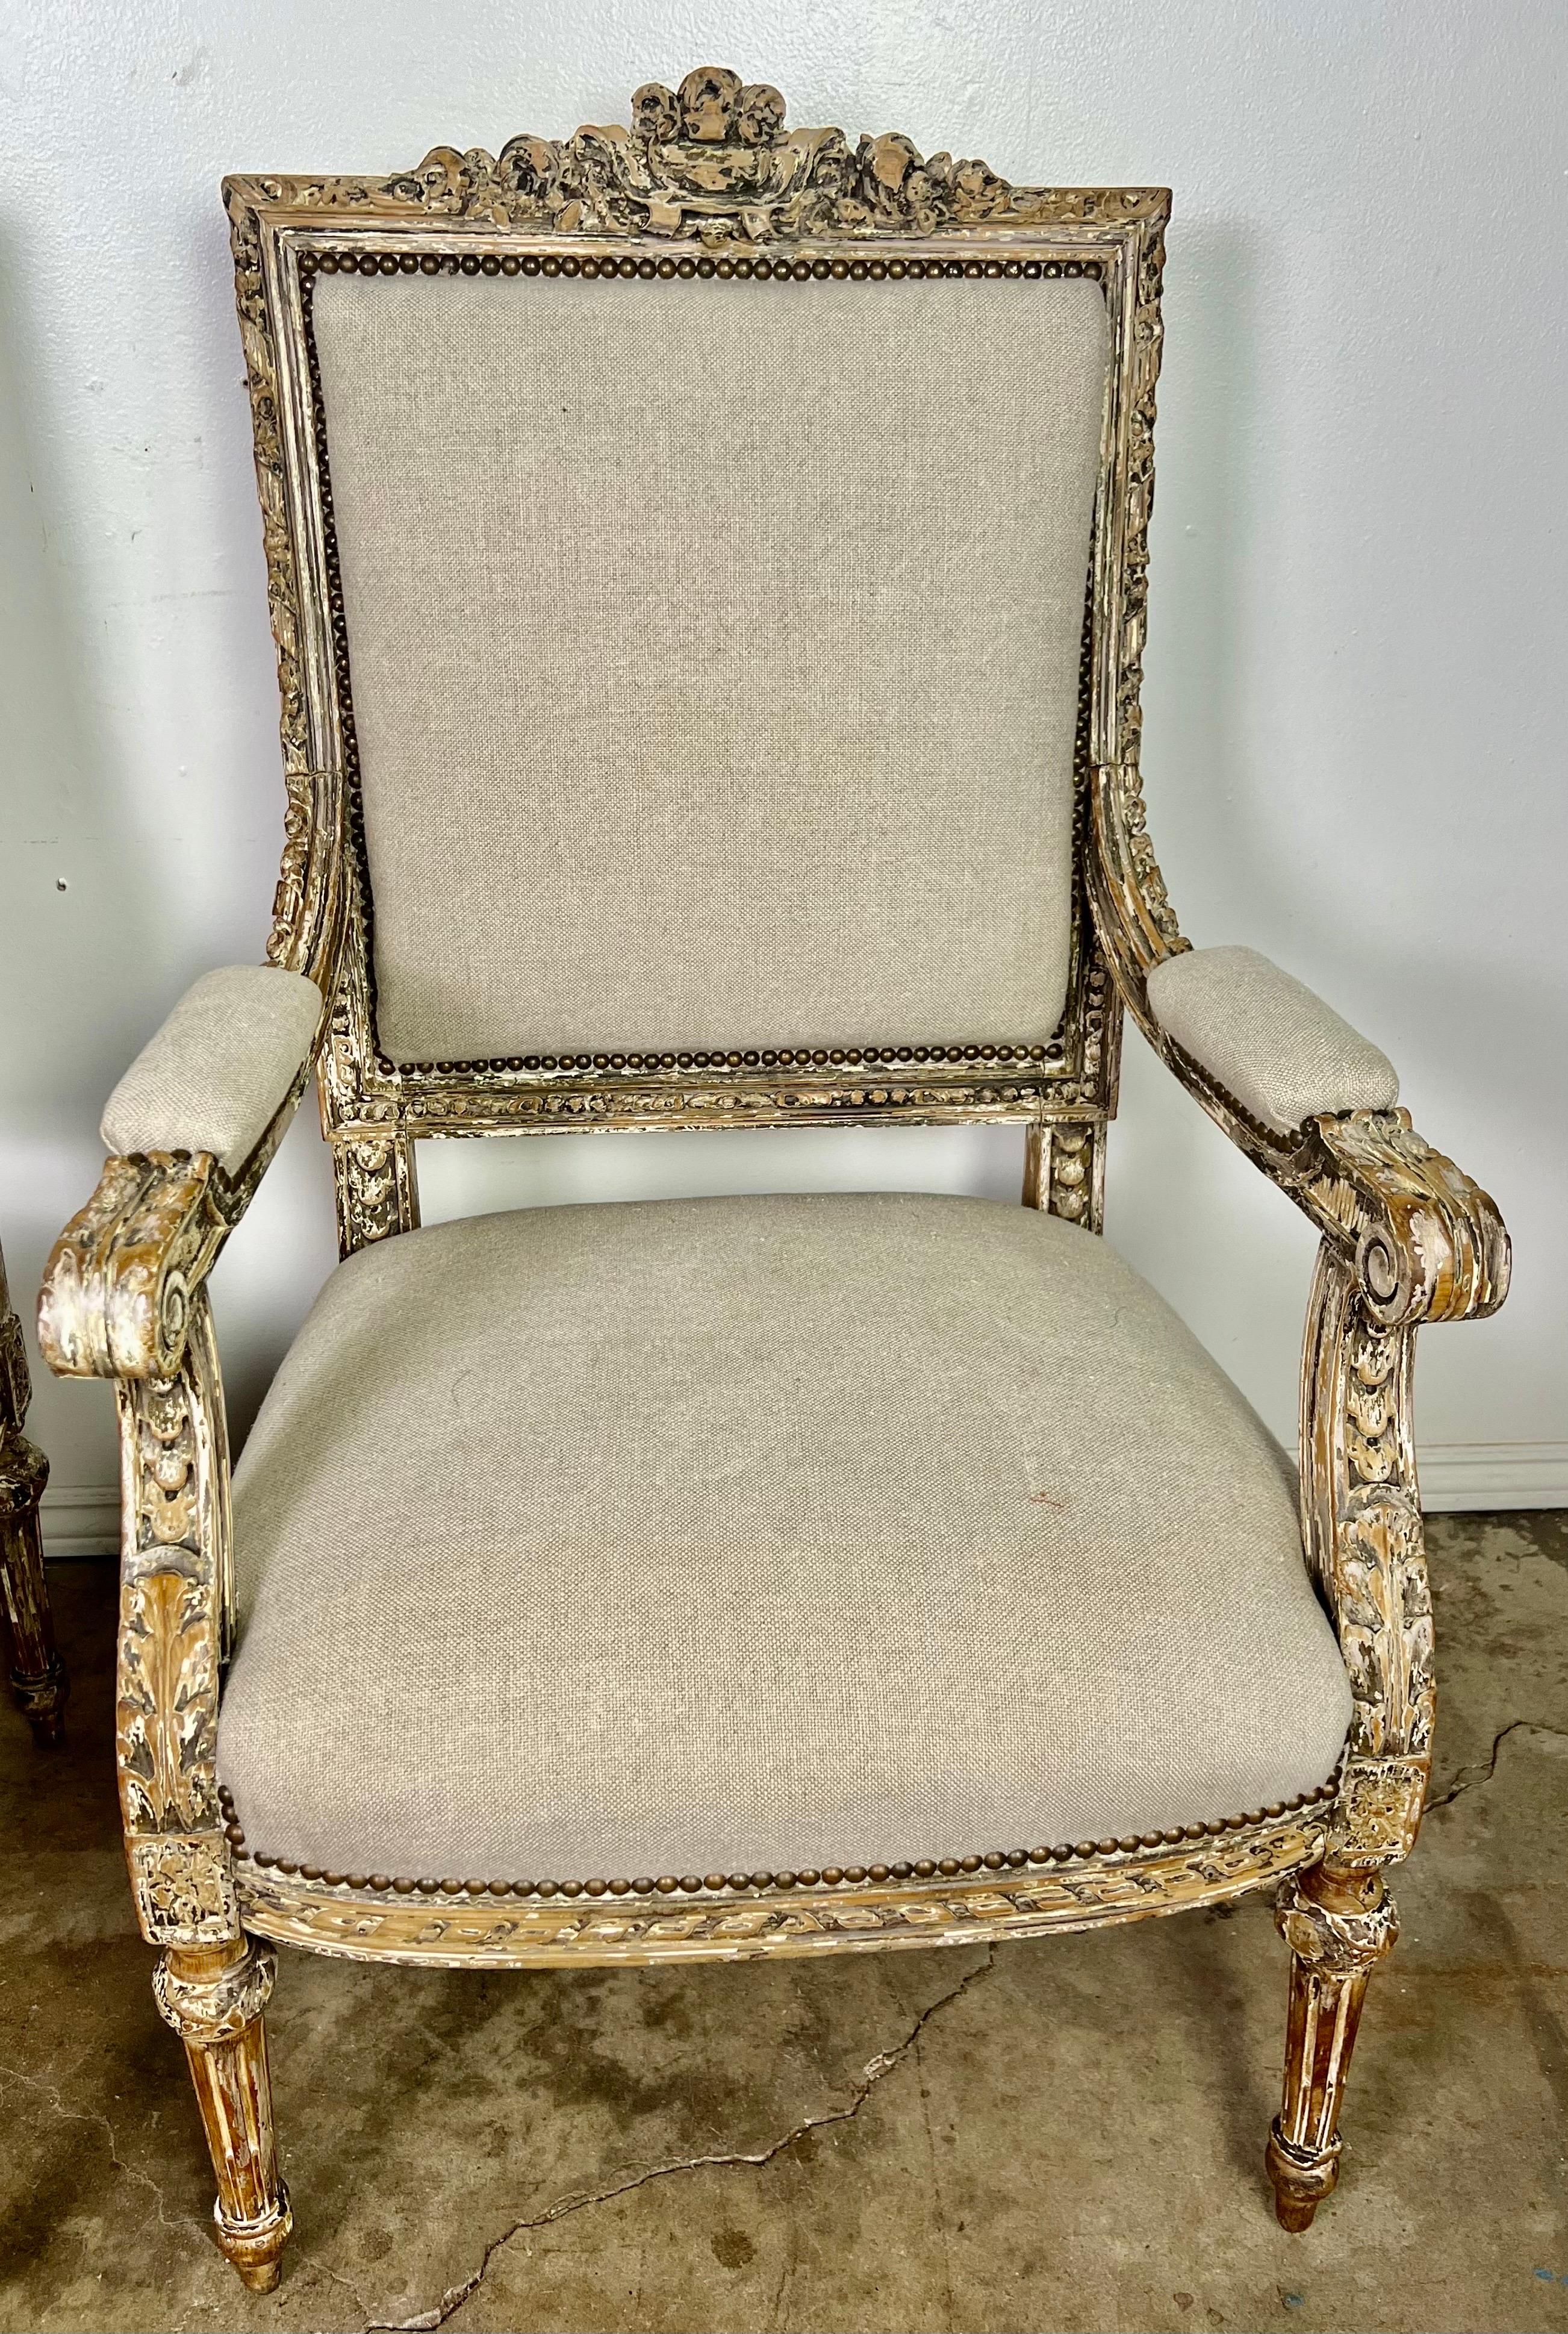 Pair of 19th C. French painted Louis XVI style armchairs.   The paint is beautifully worn depicting remnants of gray, brown & white colors throughout.  The natural color of the wood can be seen underneath the paint.  The armchairs are newly